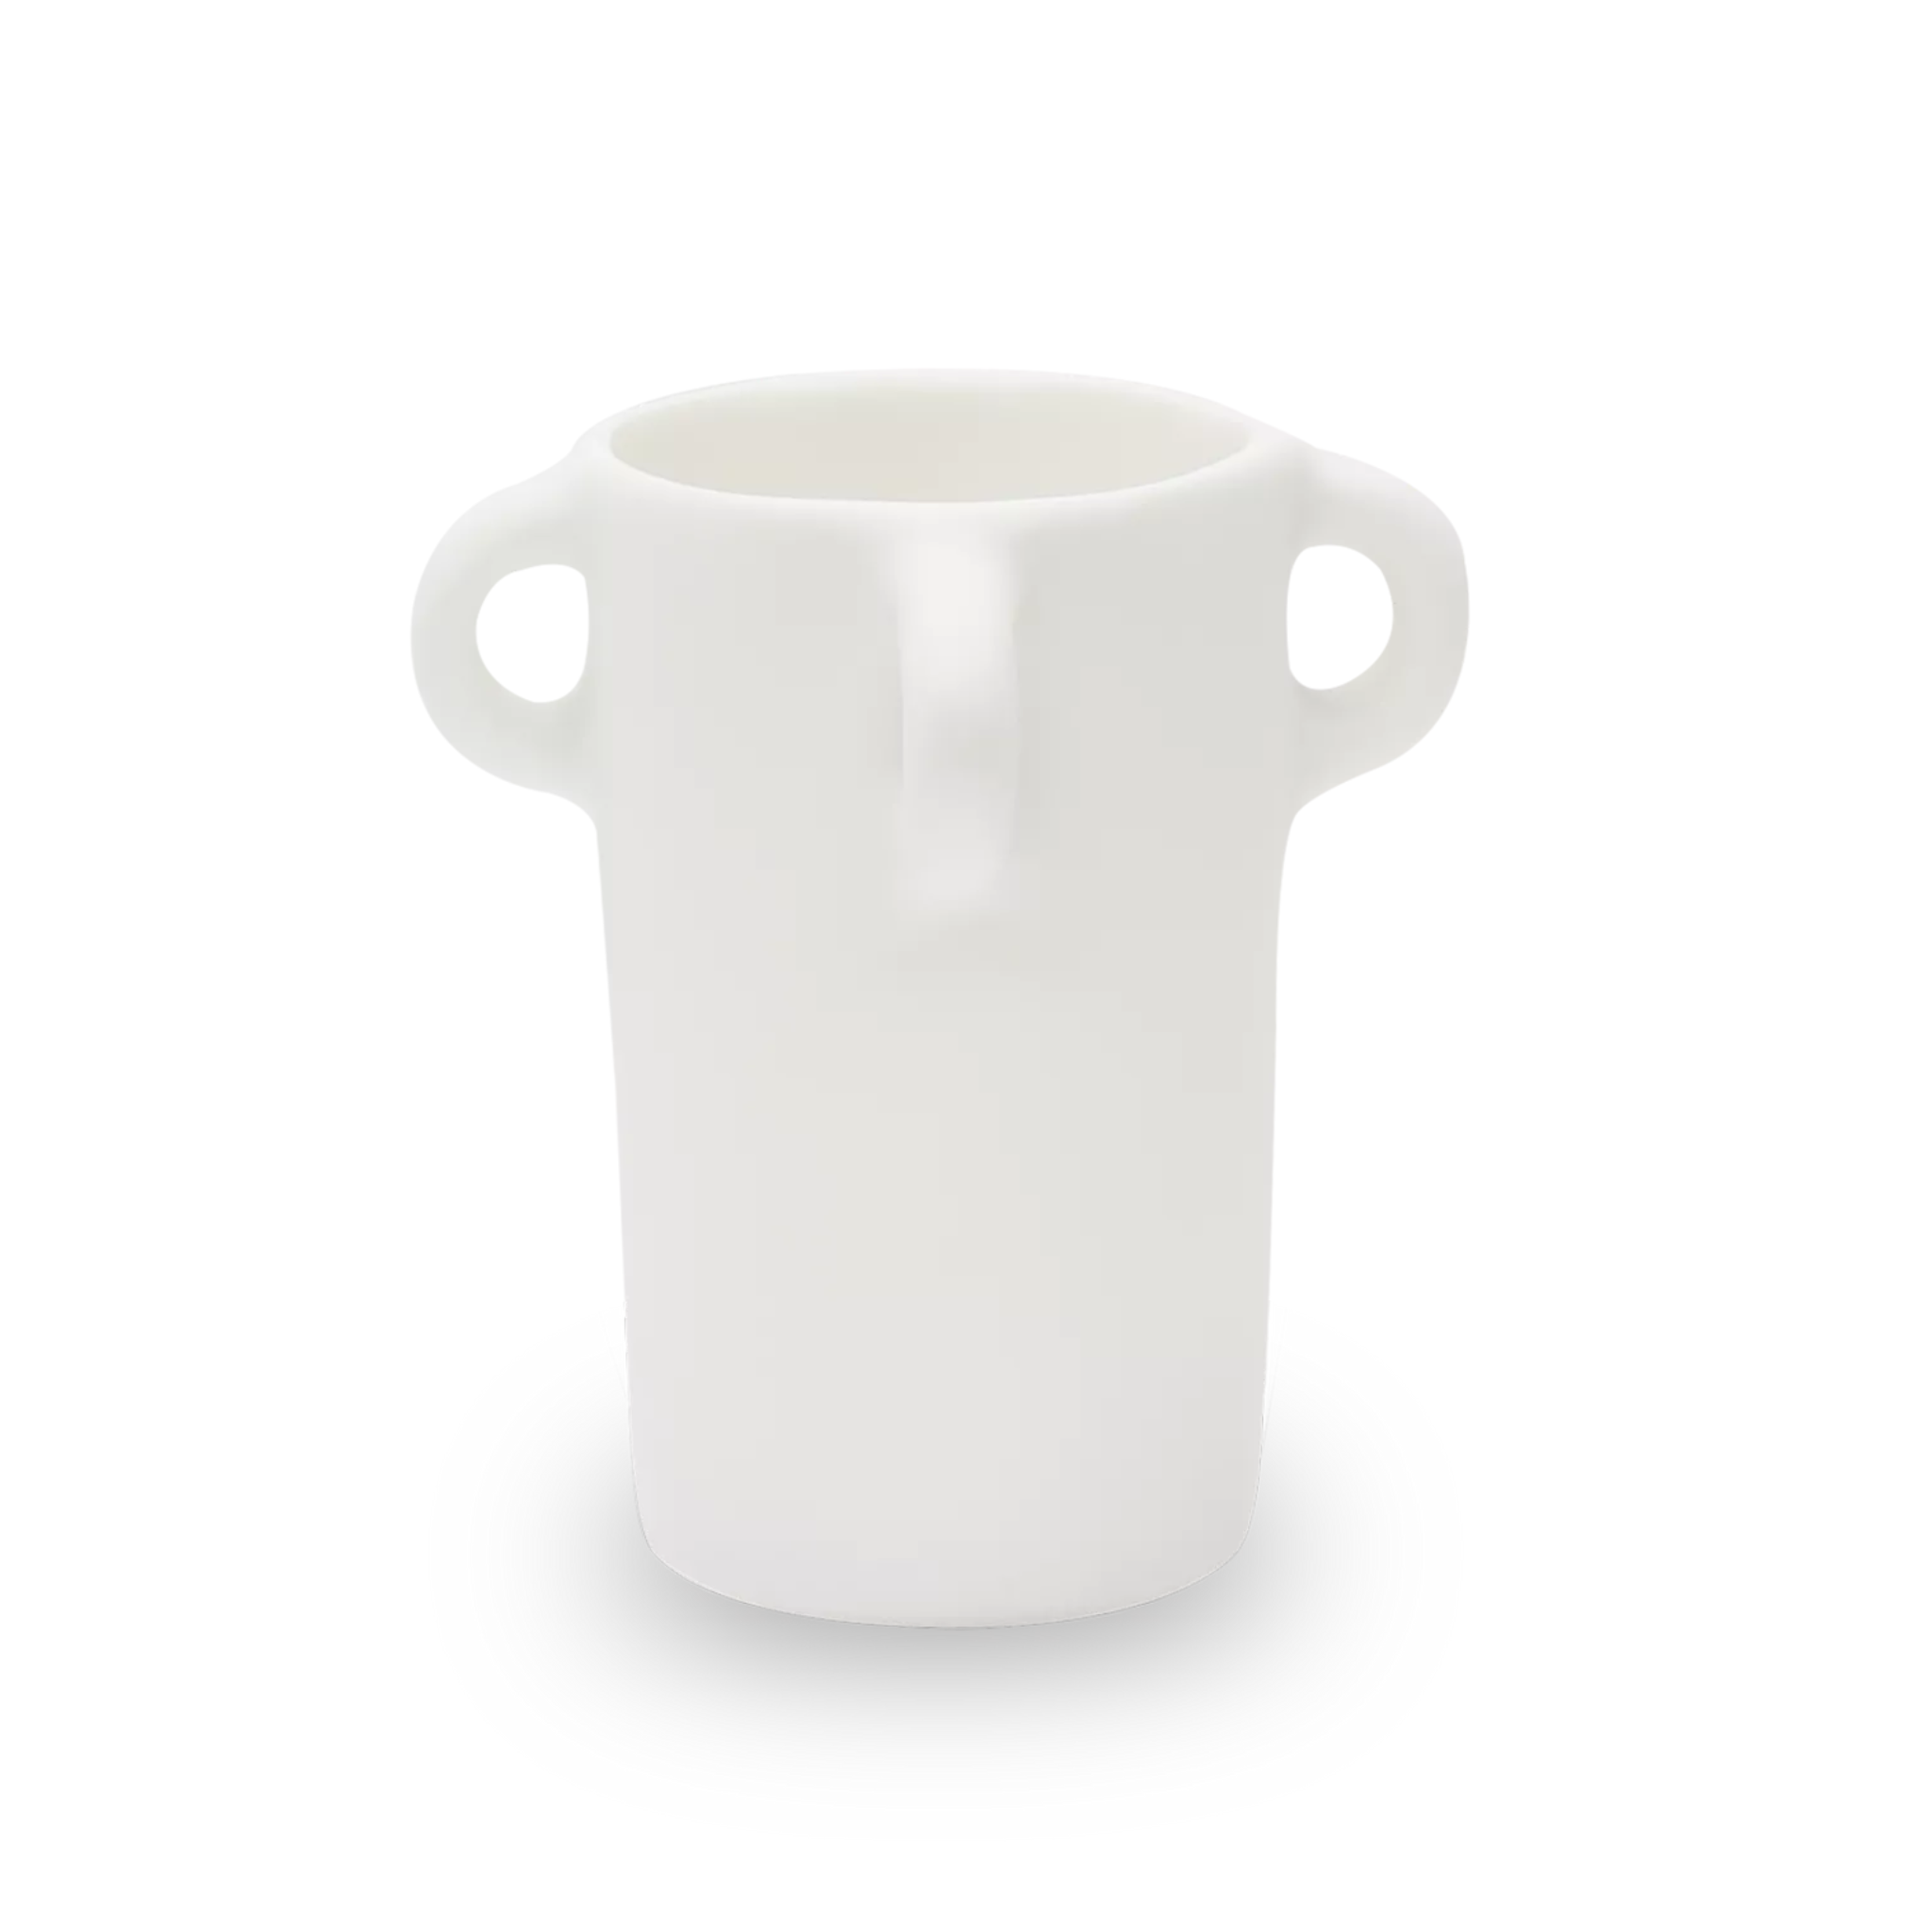 Loopy Small Vase, White